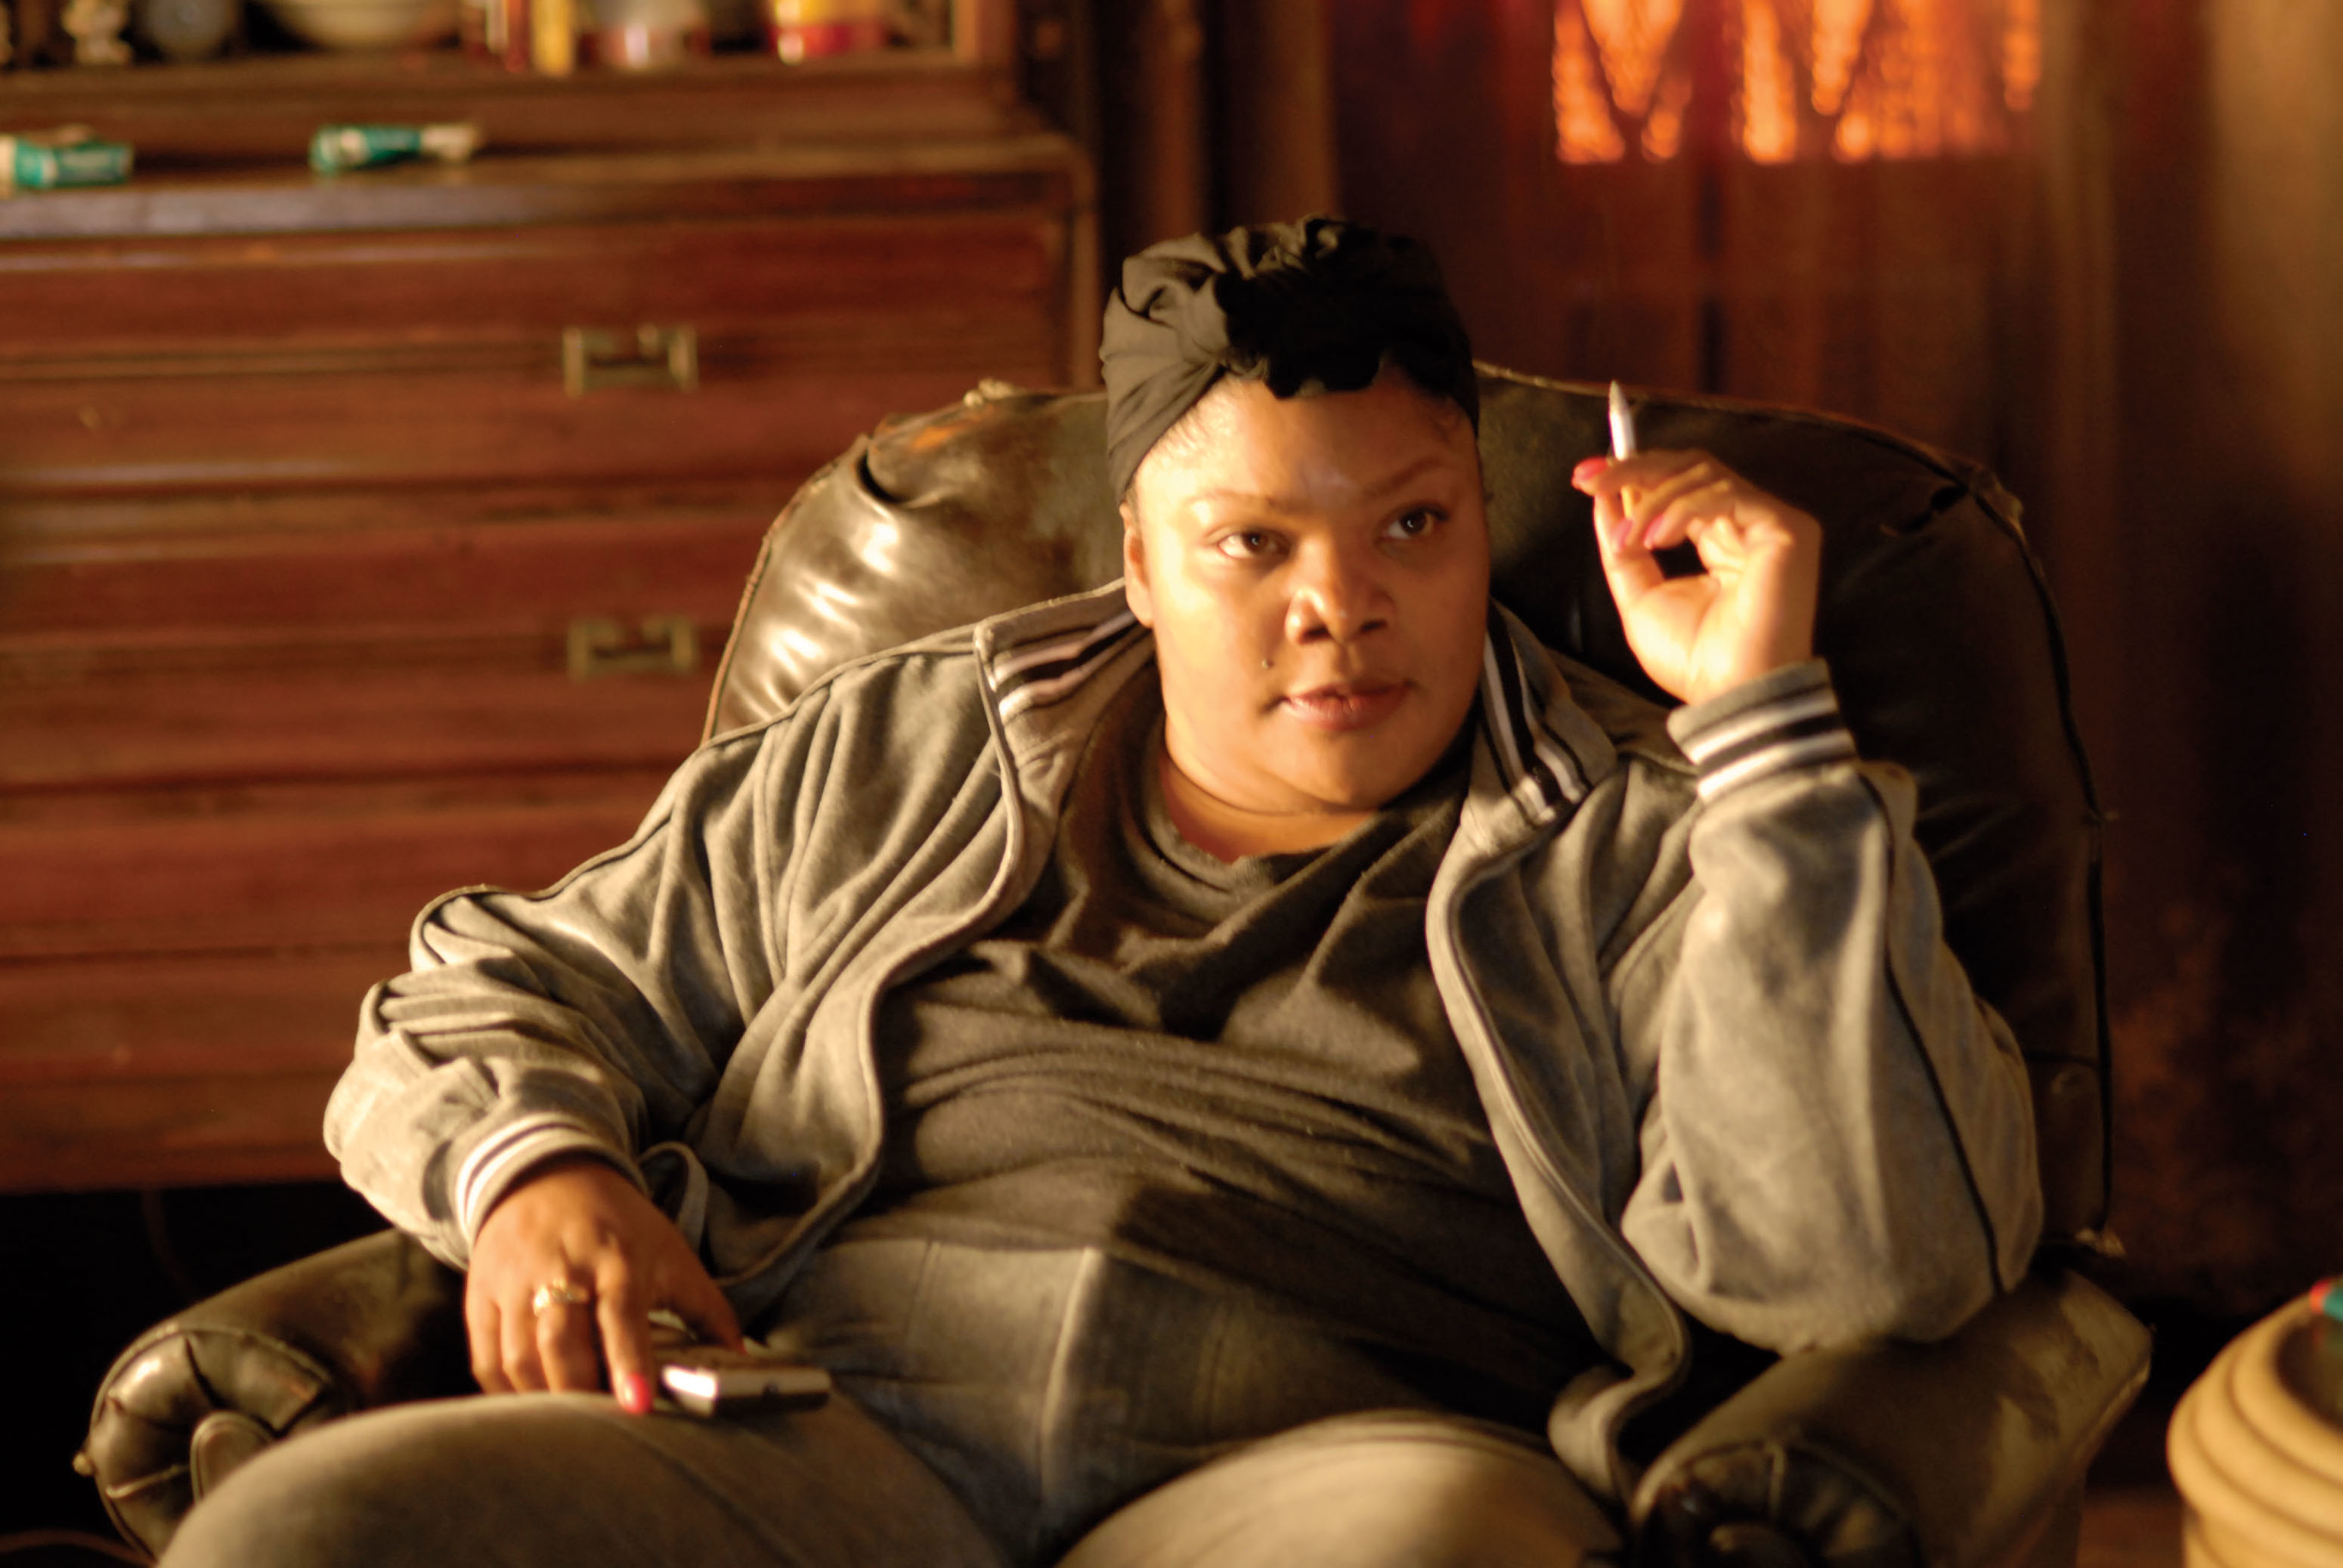 Mo&#x27;Nique in a casual outfit sits in a leather armchair, holding a cigarette in one hand and a TV remote in the other, appearing focused